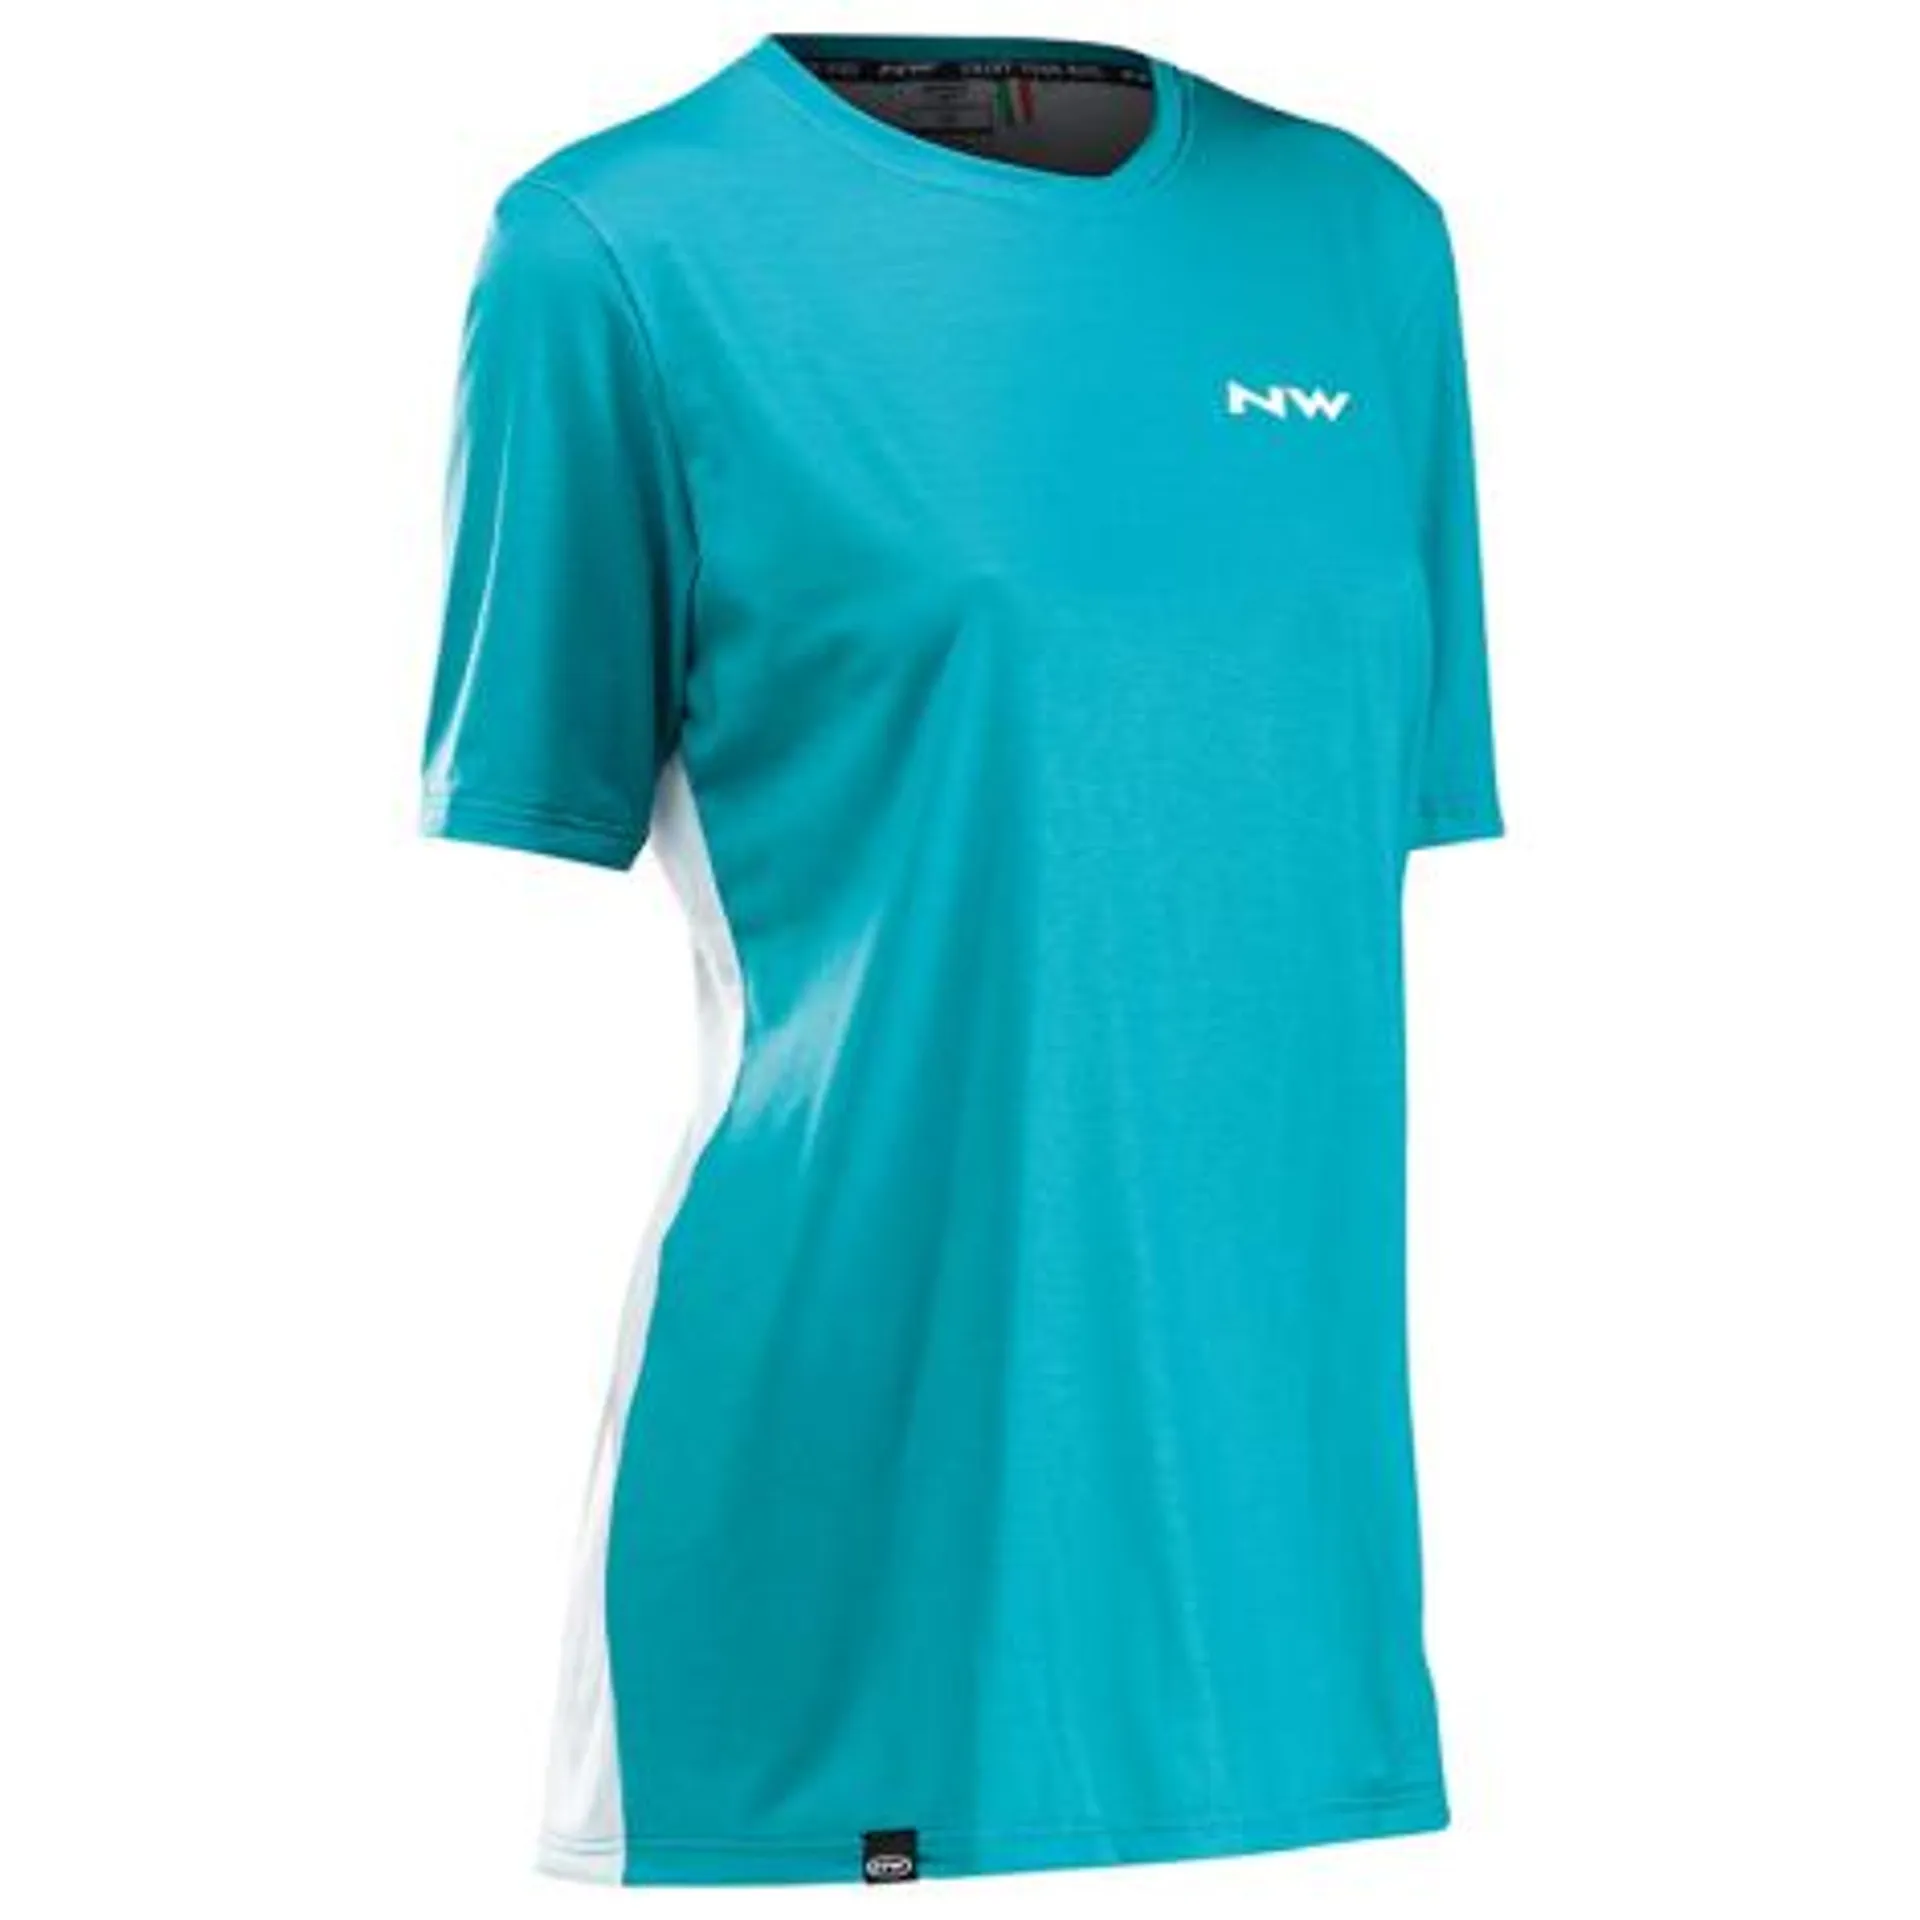 Northwave X-Trail 2 Women's Sleeve Cycling Jersey